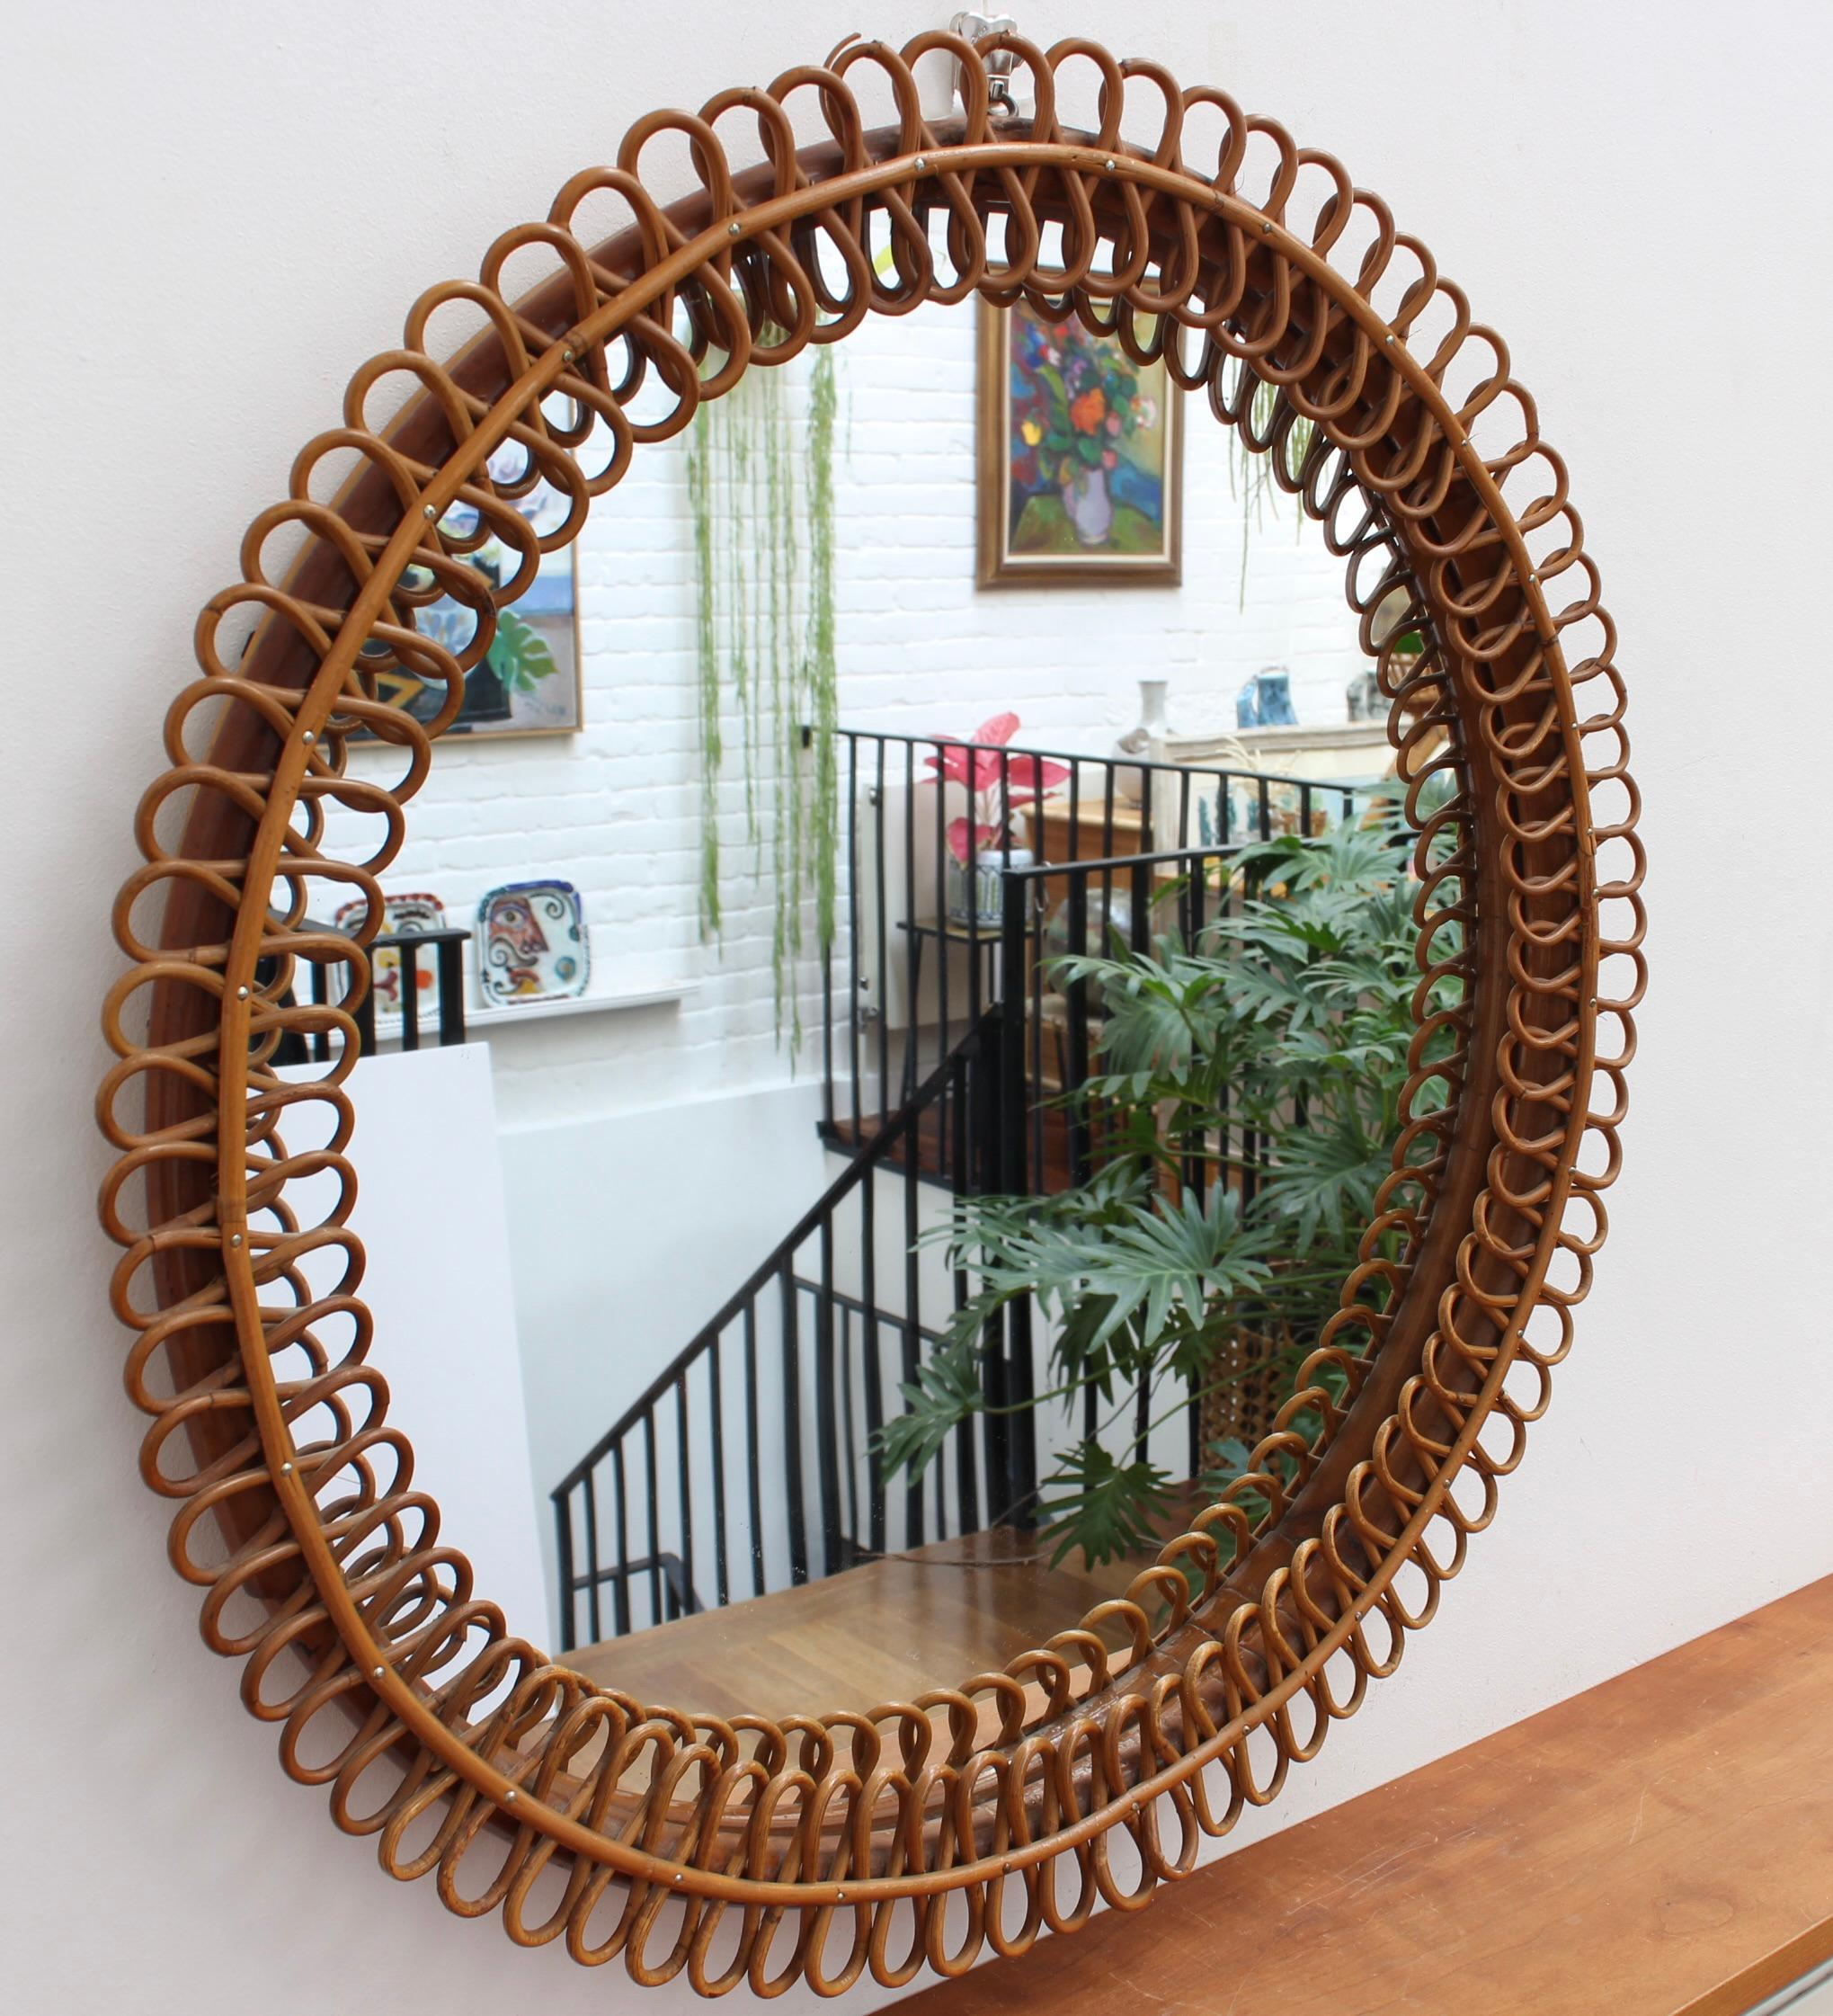 Mid-Century Italian rattan wall mirror (circa 1960s). This mirror has a very delightful  circular sun-shaped frame with rattan figure-eights resembling pretzels. There is a characterful, aged patina on the mirror frame and overall, the piece is in